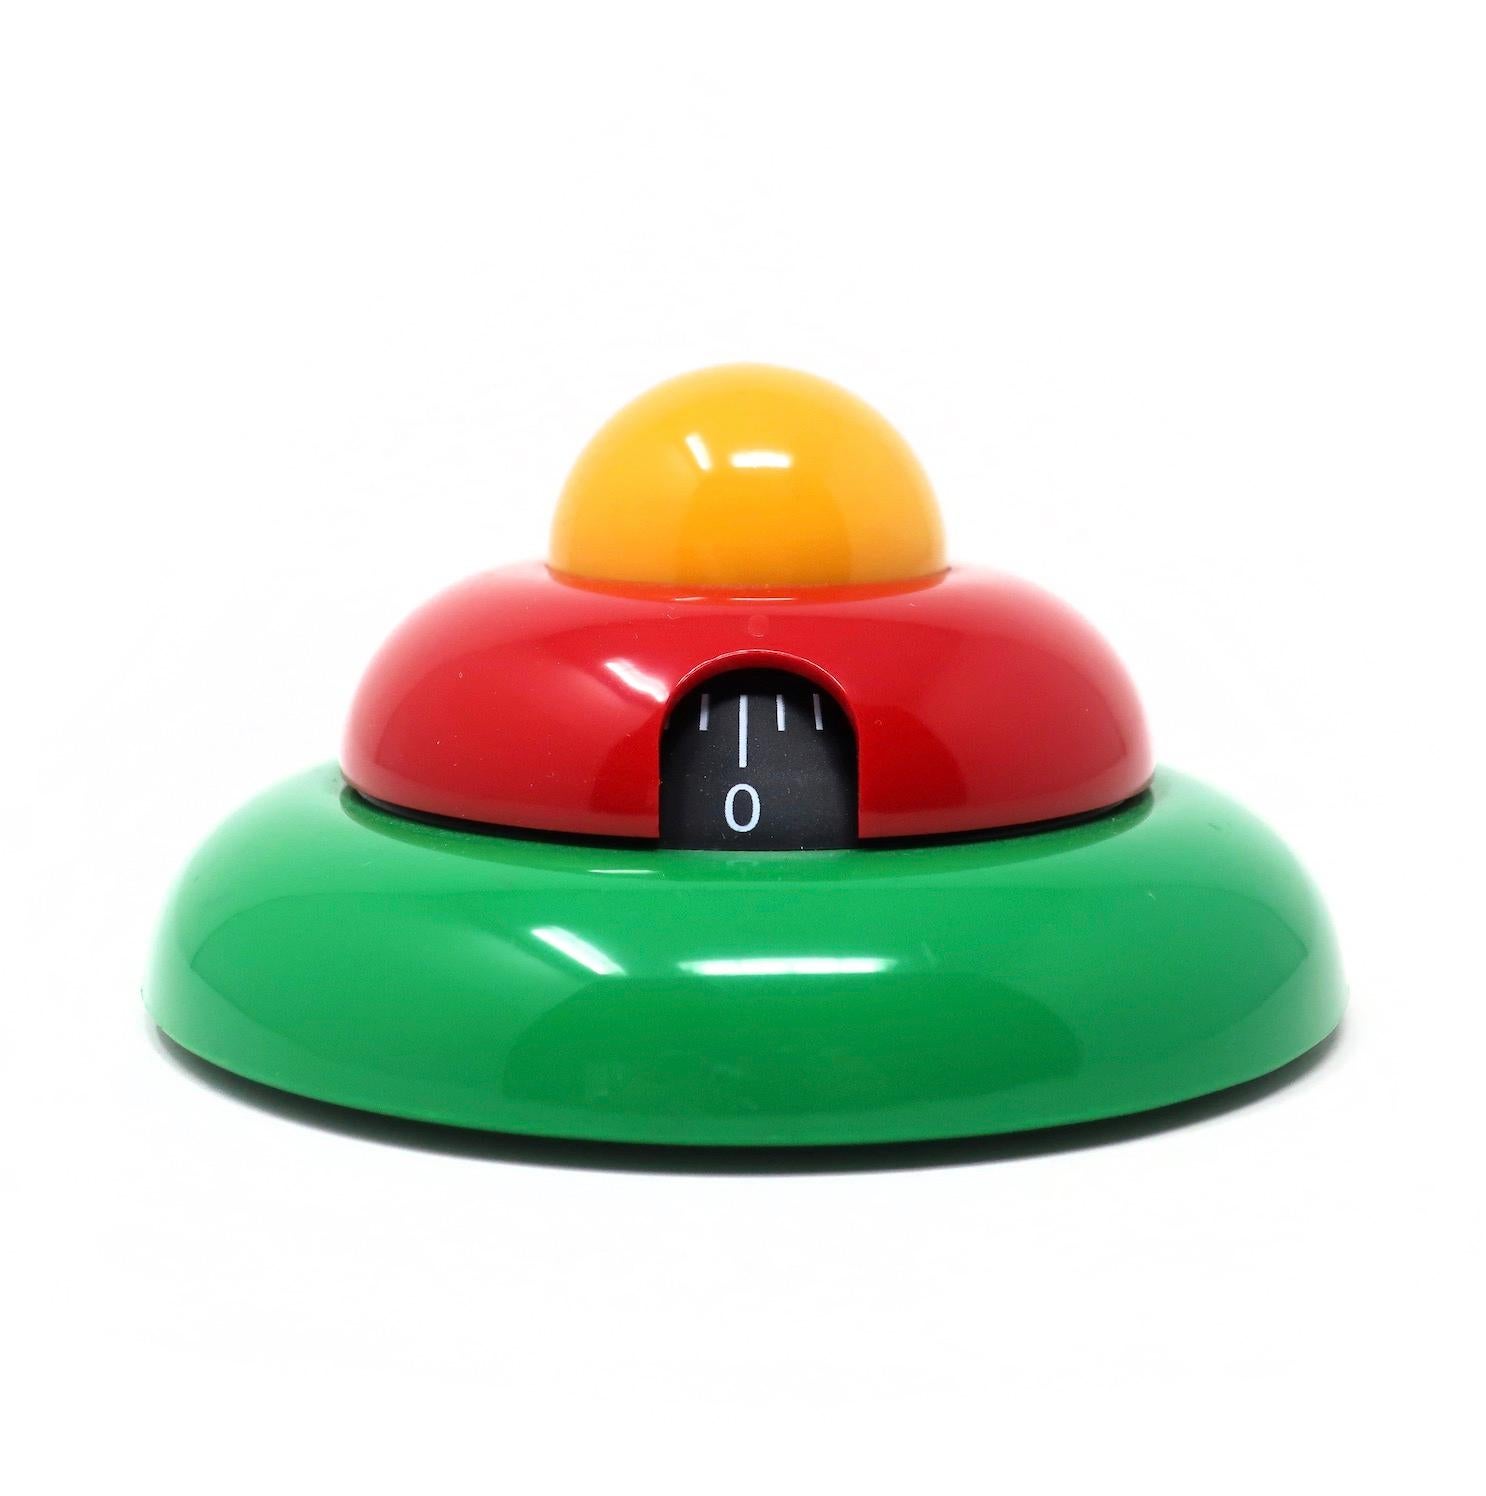 A whimsical Italian postmodern multicolor kitchen timer designed by Roberto Pezzetta for WikiDue. Stacked green, red and yellow discs give it a fun Memphis Milano. Runs for up to 60 minutes.

In very good vintage condition with slight wear